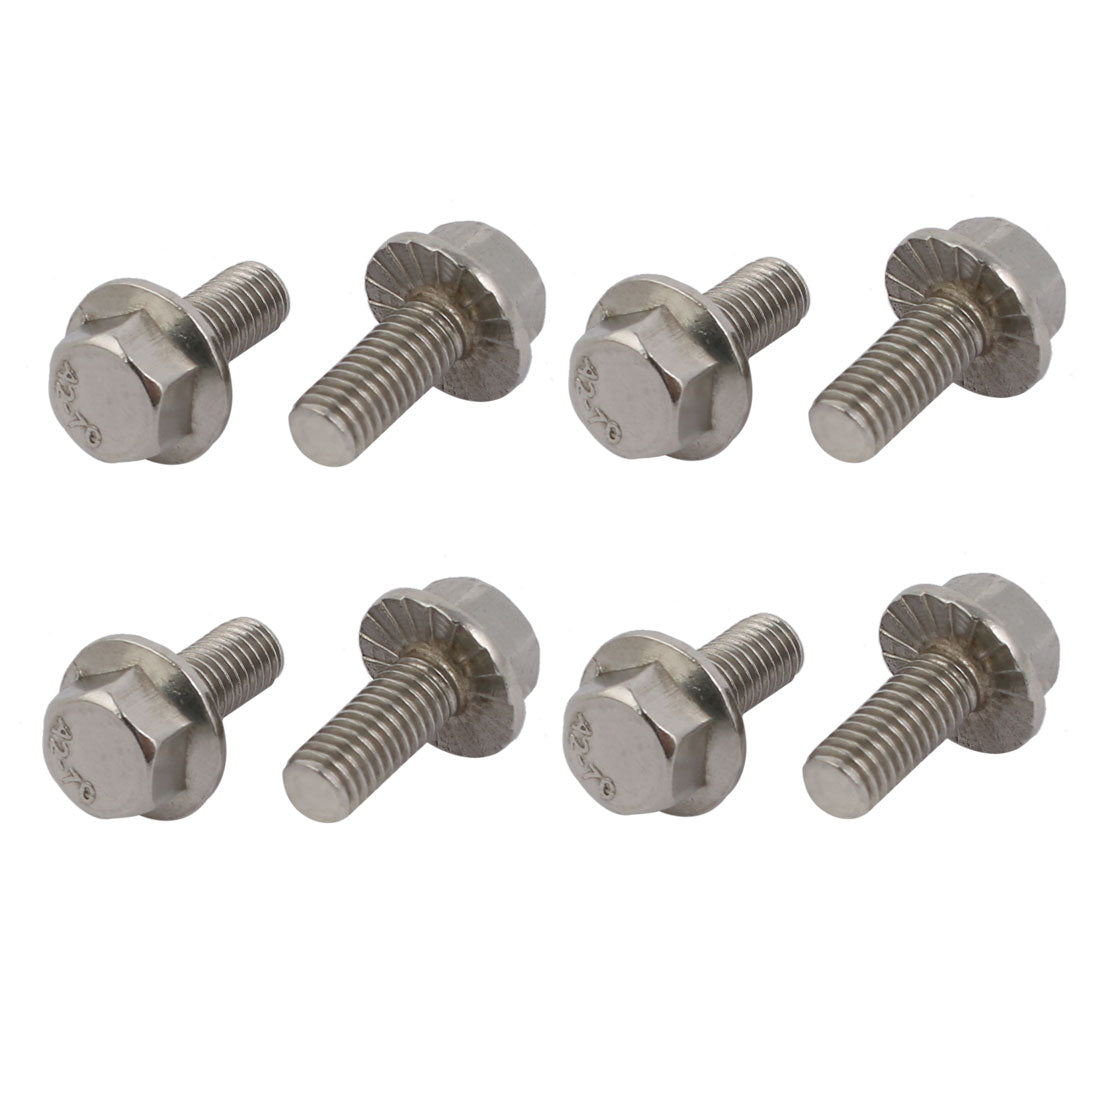 uxcell Uxcell M5x12mm Thread 304 Stainless Steel Hex Head Serrated Flange Screw Bolt 8pcs